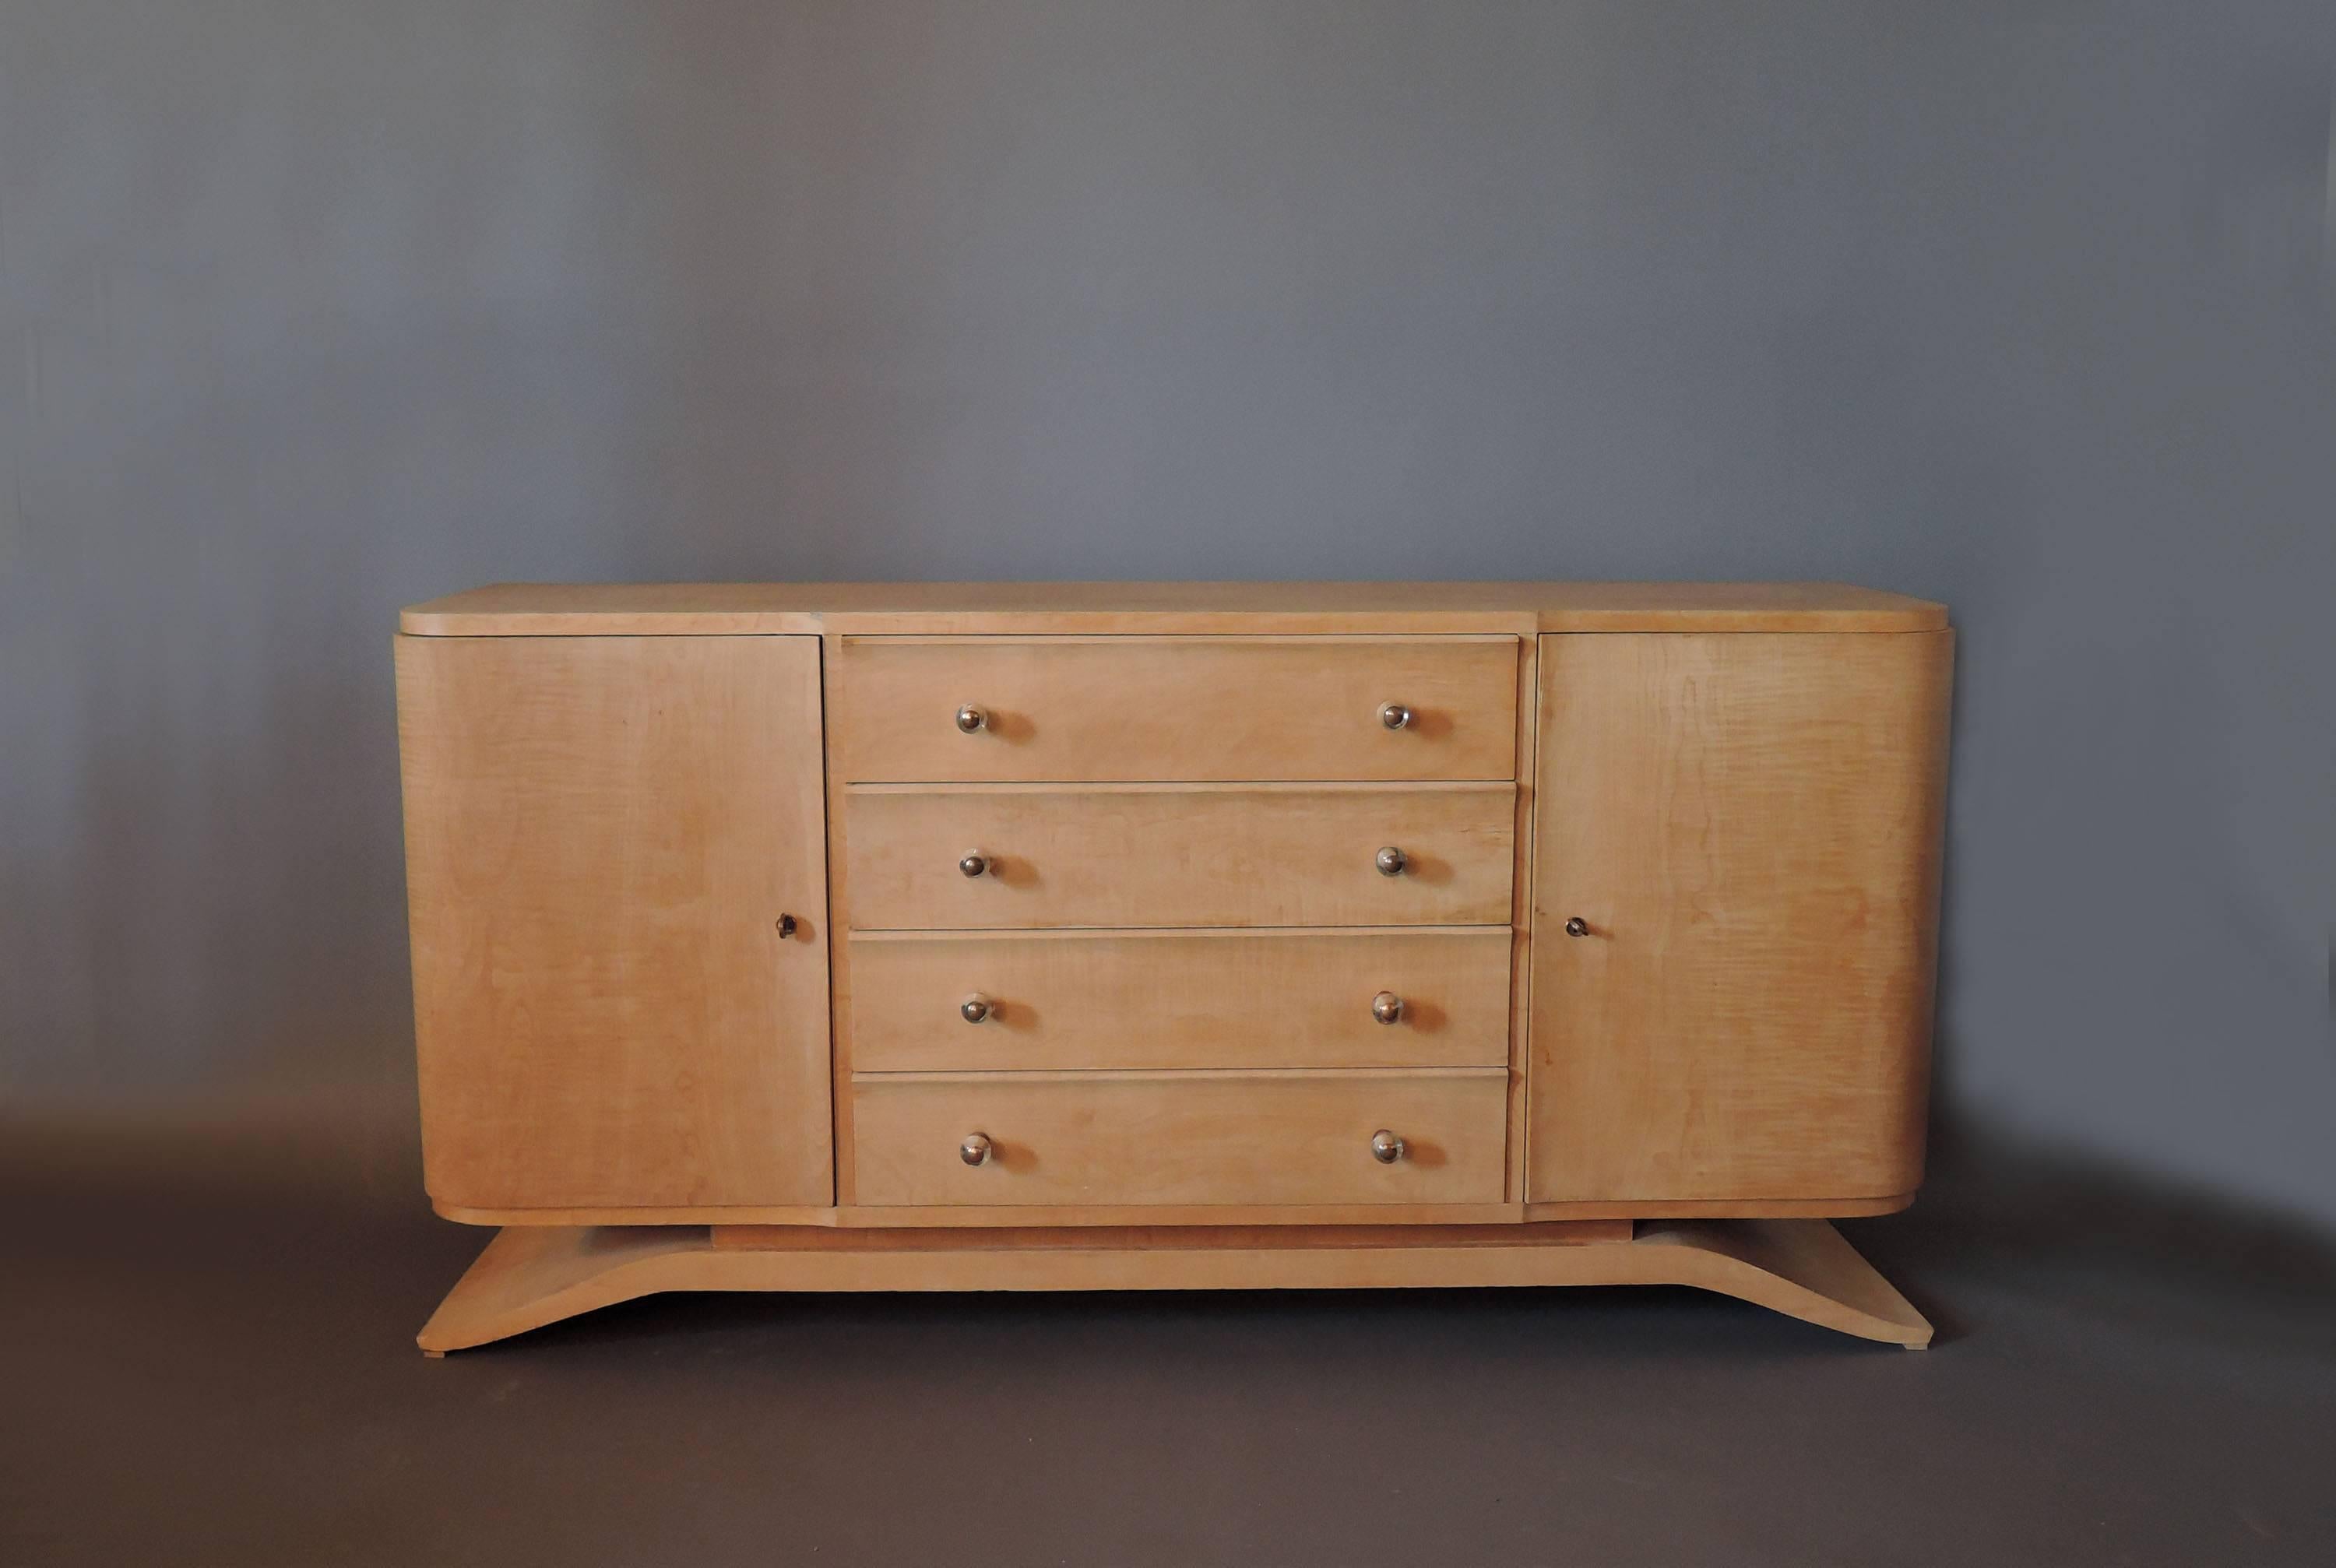 A four drawers and two doors sycamore chest of drawers with glass and bronze knobs.
Attributed to Suzanne Guiguichon.
Price includes refinishing (satin finish).